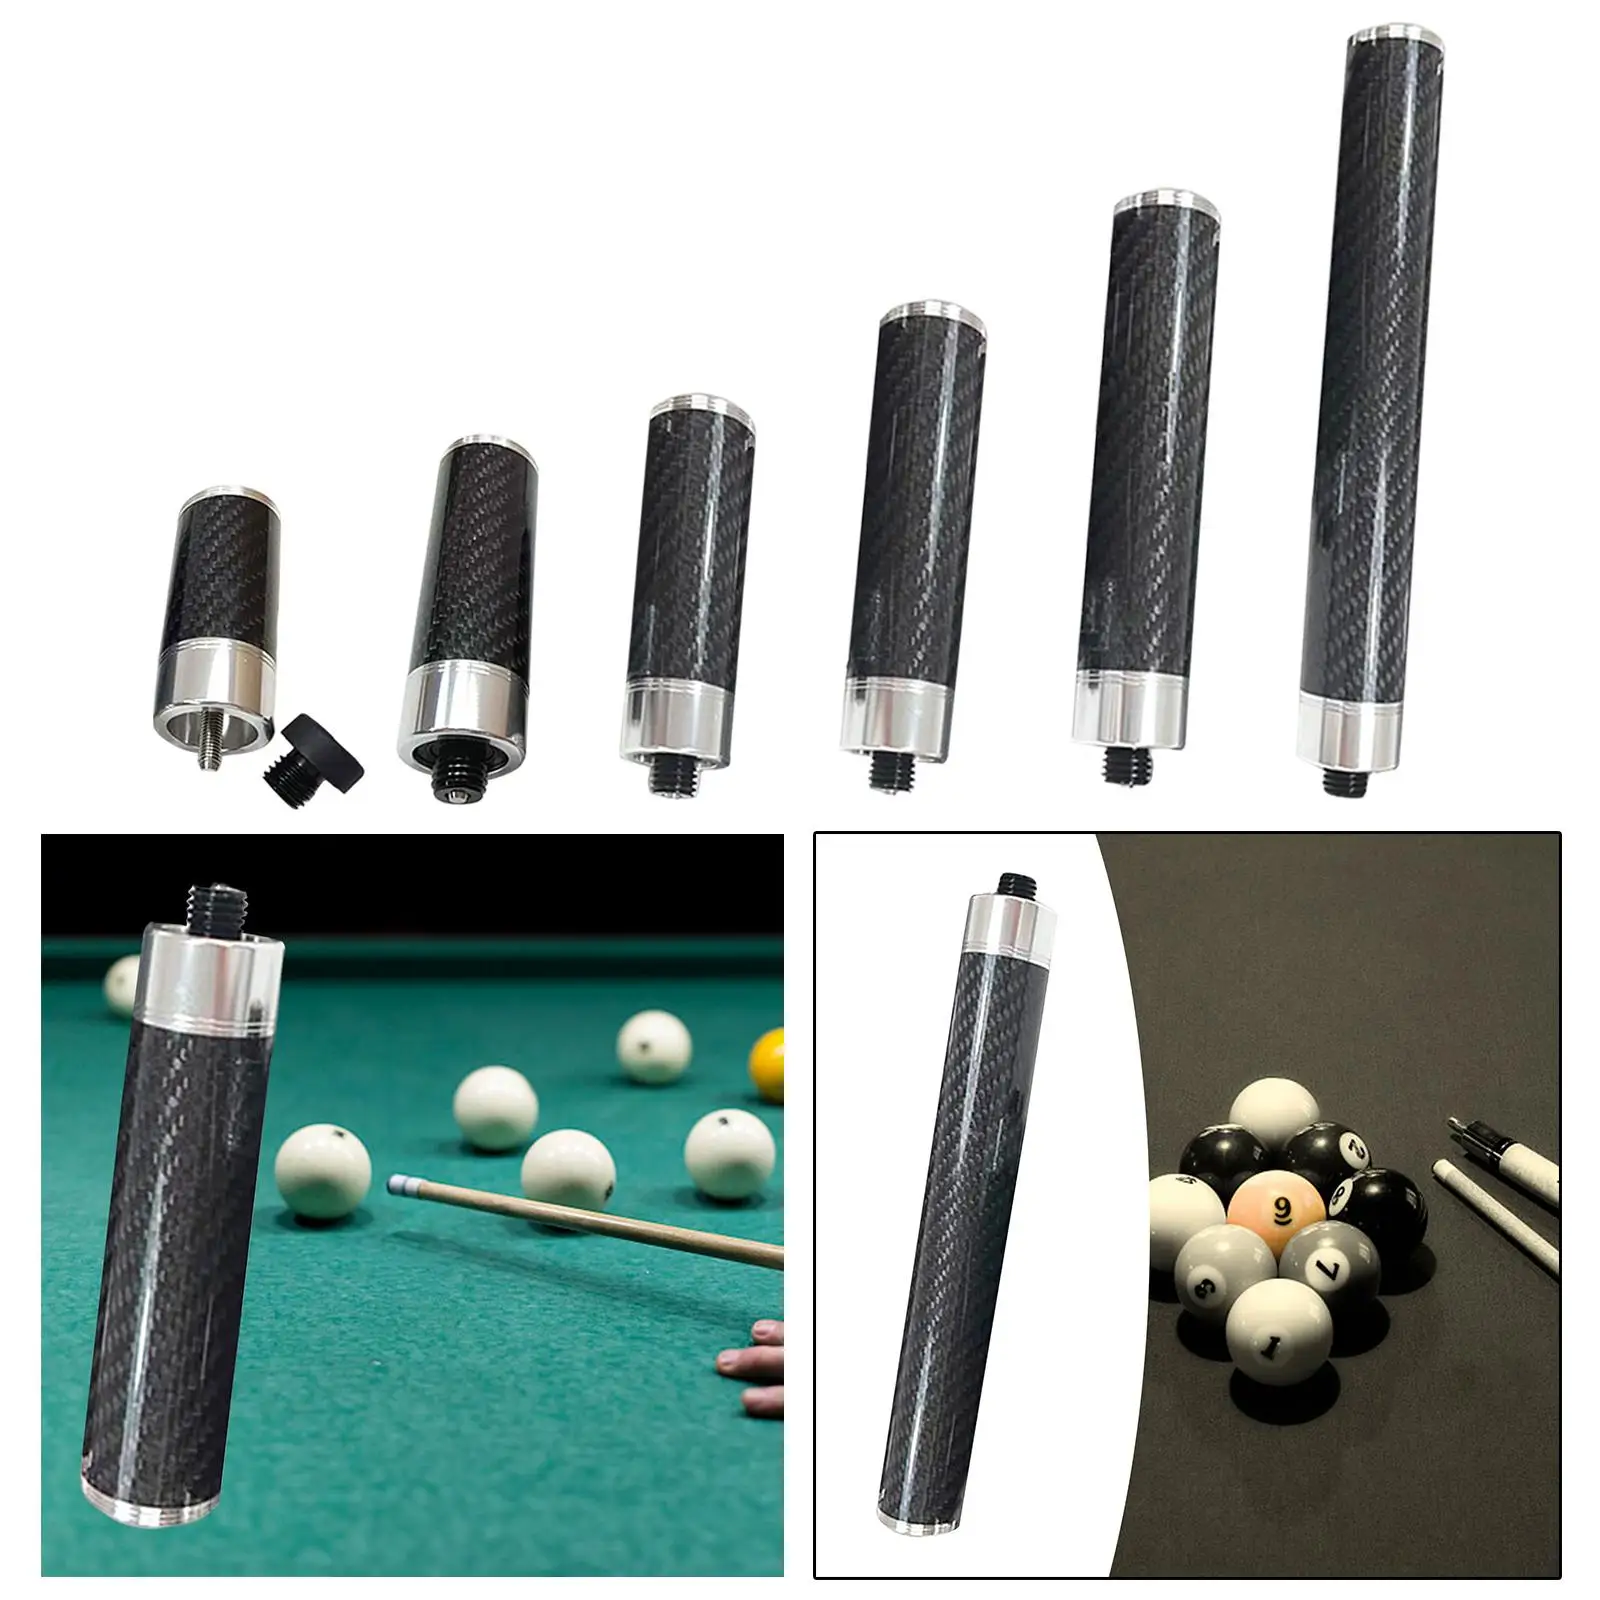 Cue End Extender with Bumper Billiard Connect Shaft Billiards Pool Cue Extension Snooker Cue Stick for Beginners Billiard Cues